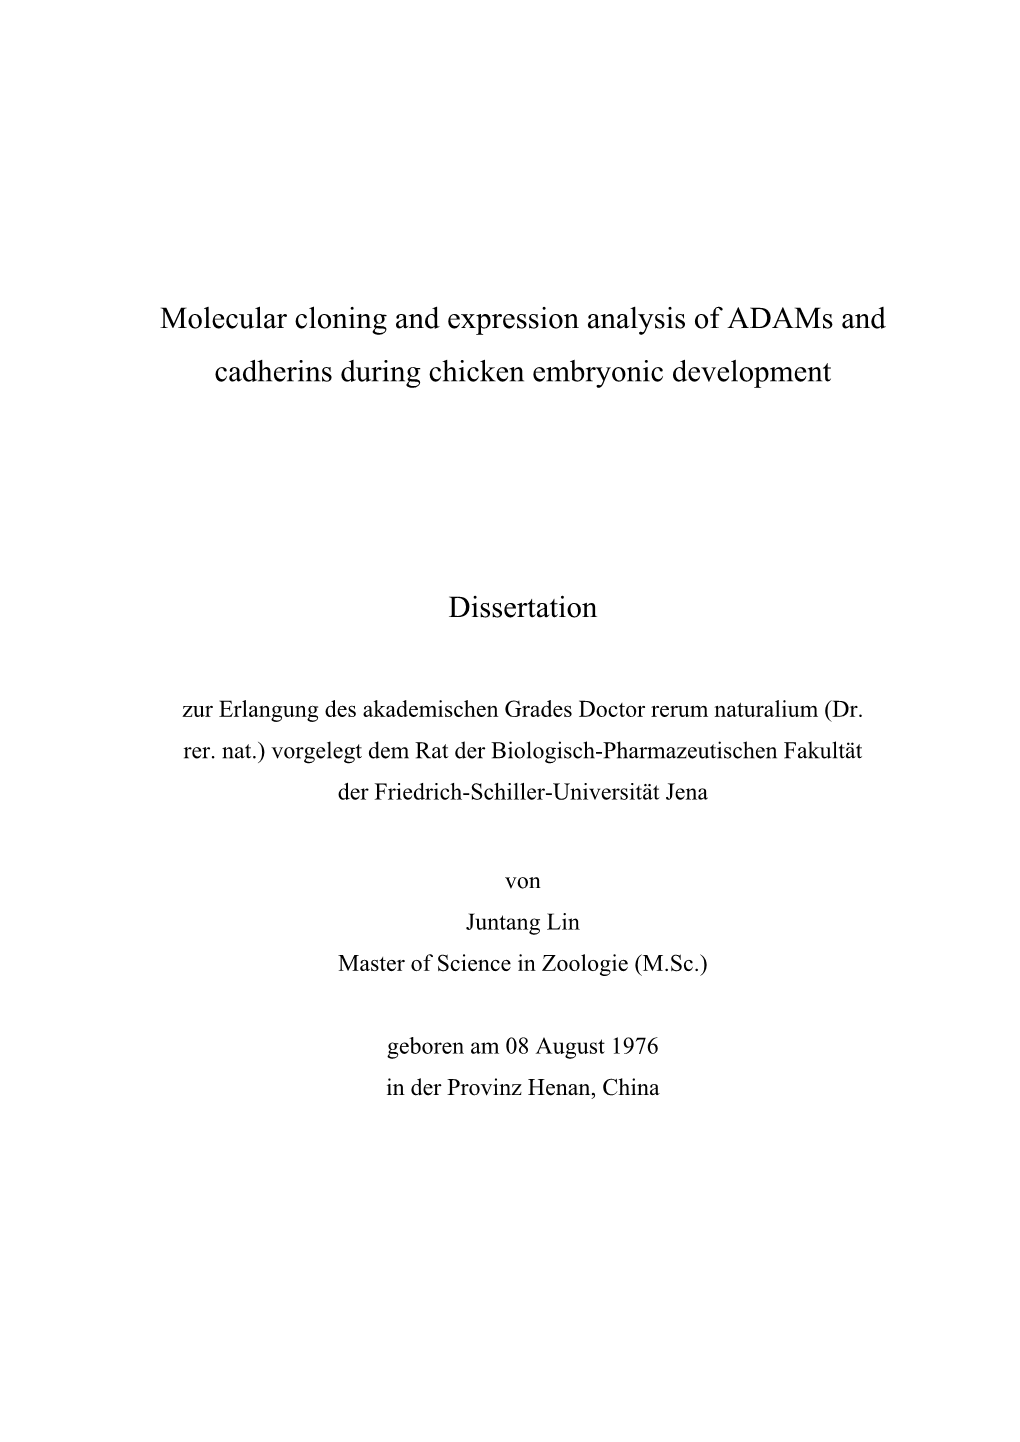 Molecular Cloning and Expression Analysis of Adams and Cadherins During Chicken Embryonic Development